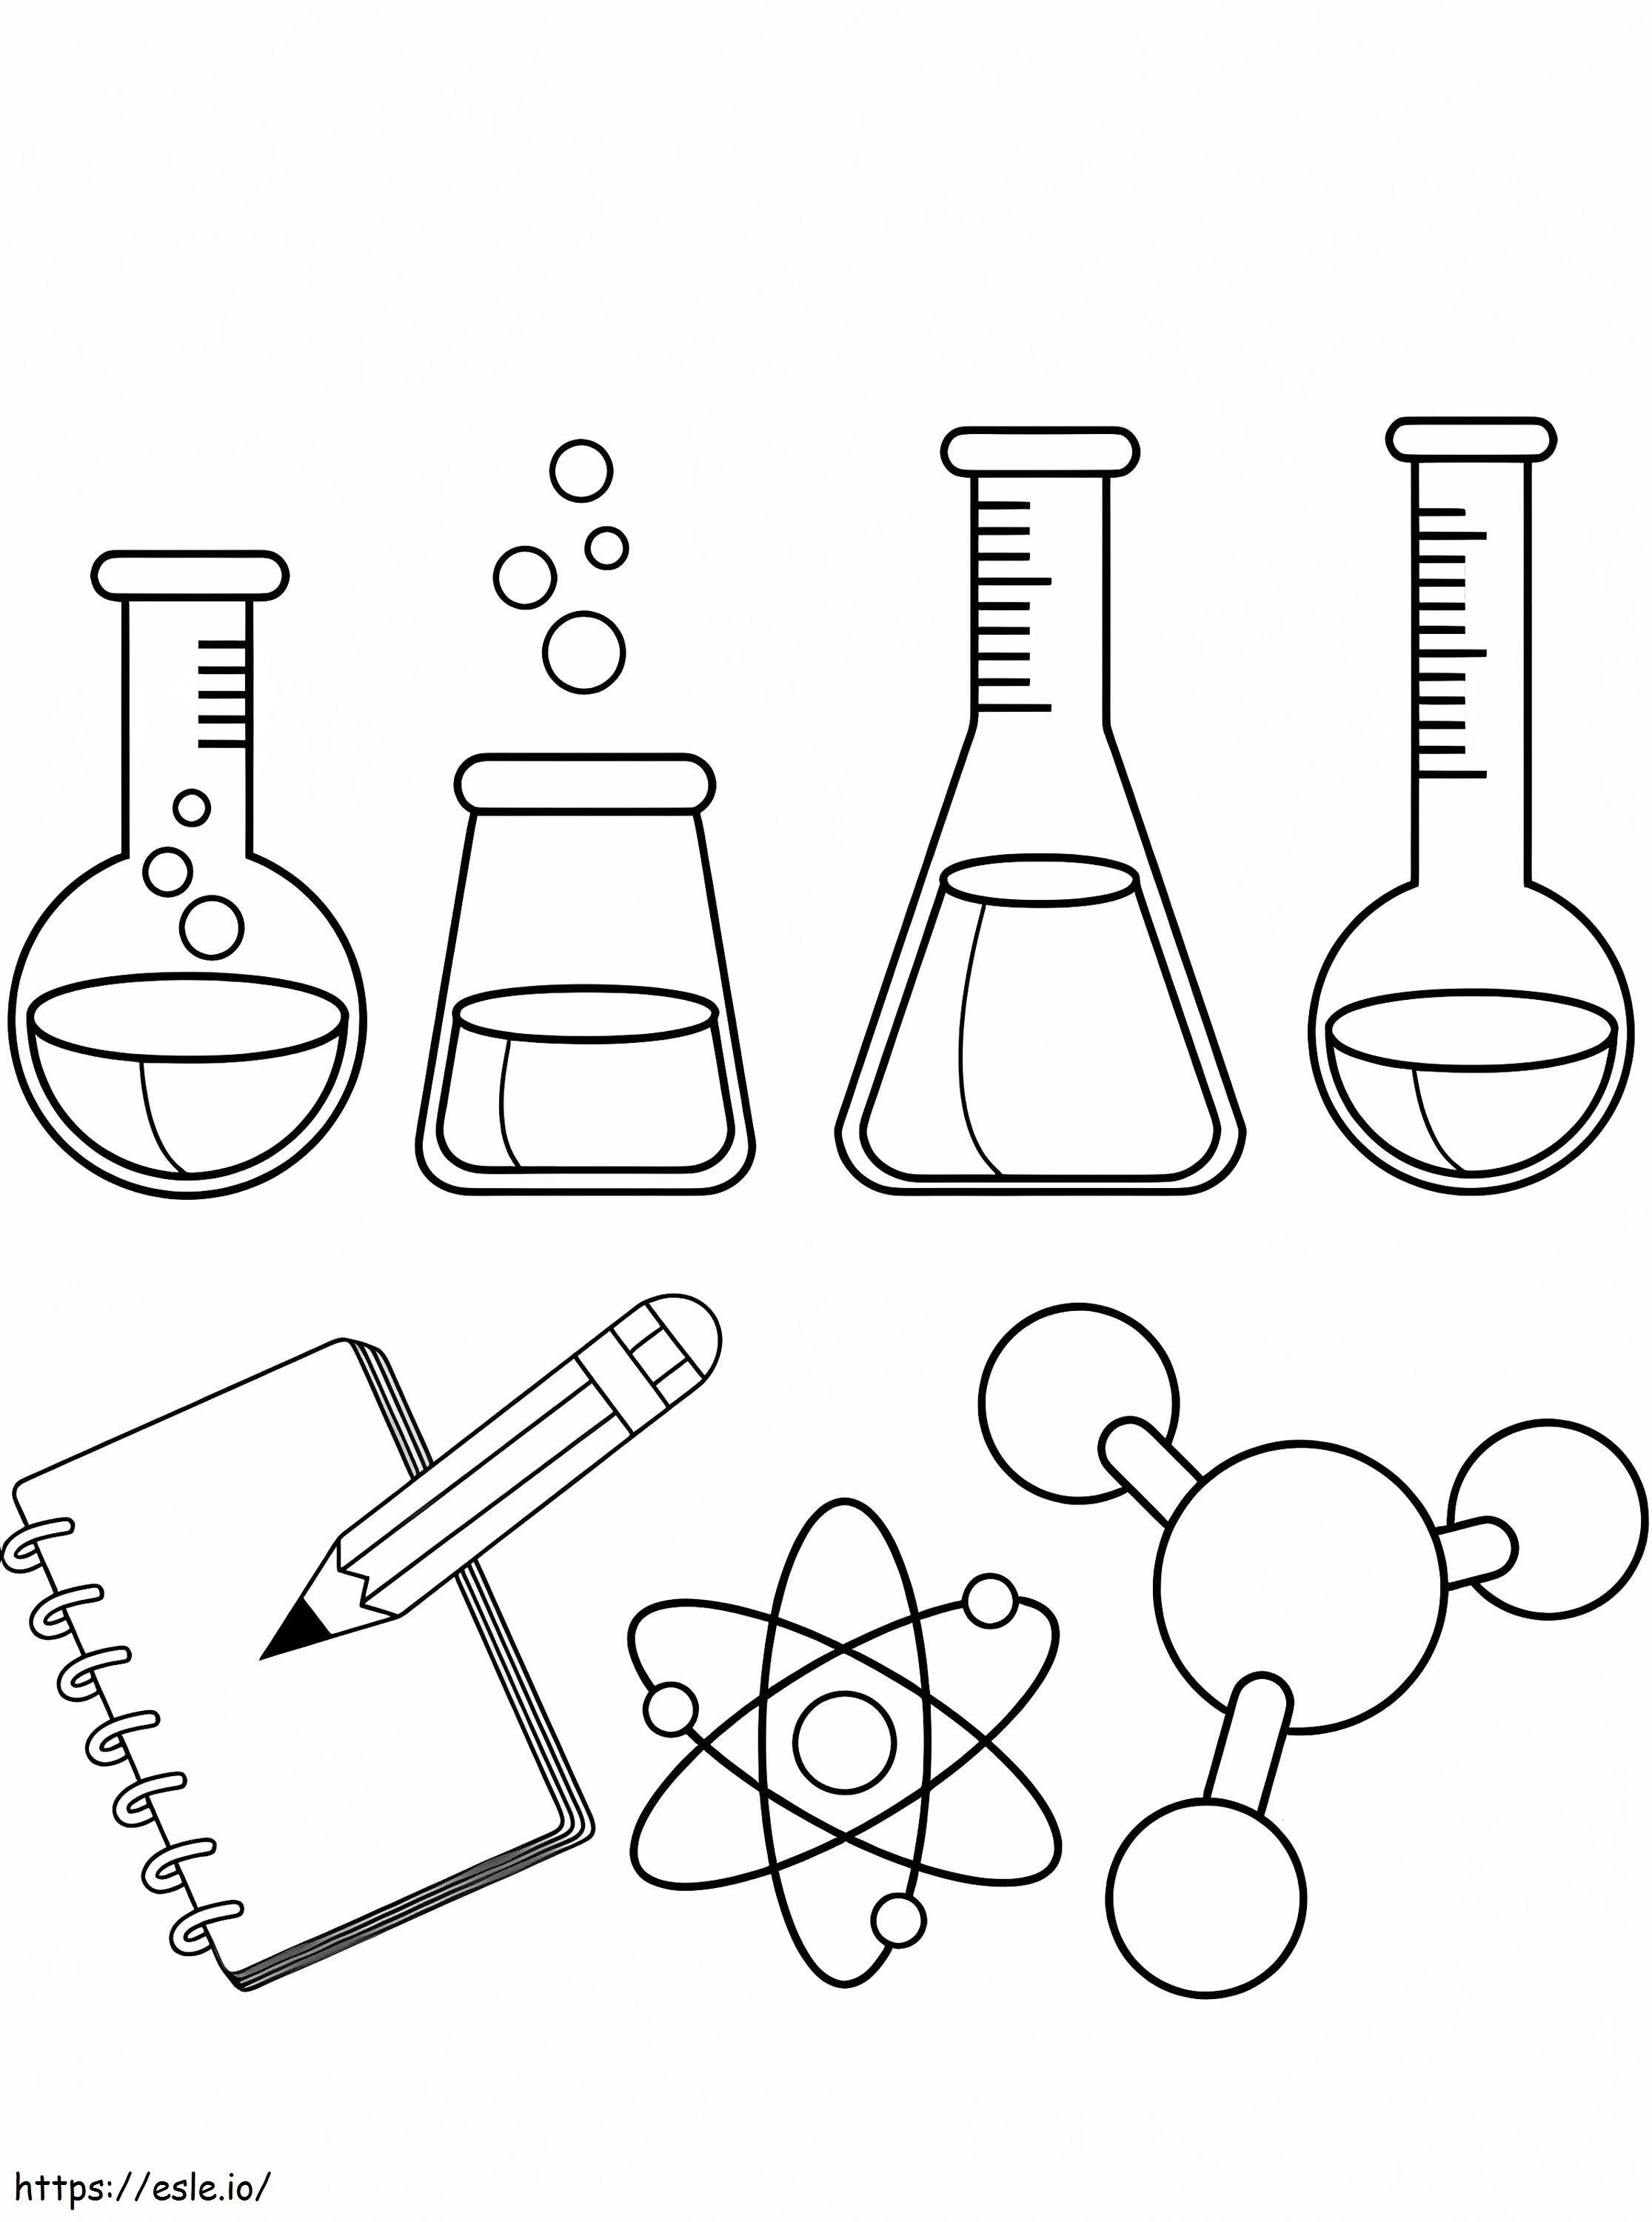 Science Tools 1 coloring page